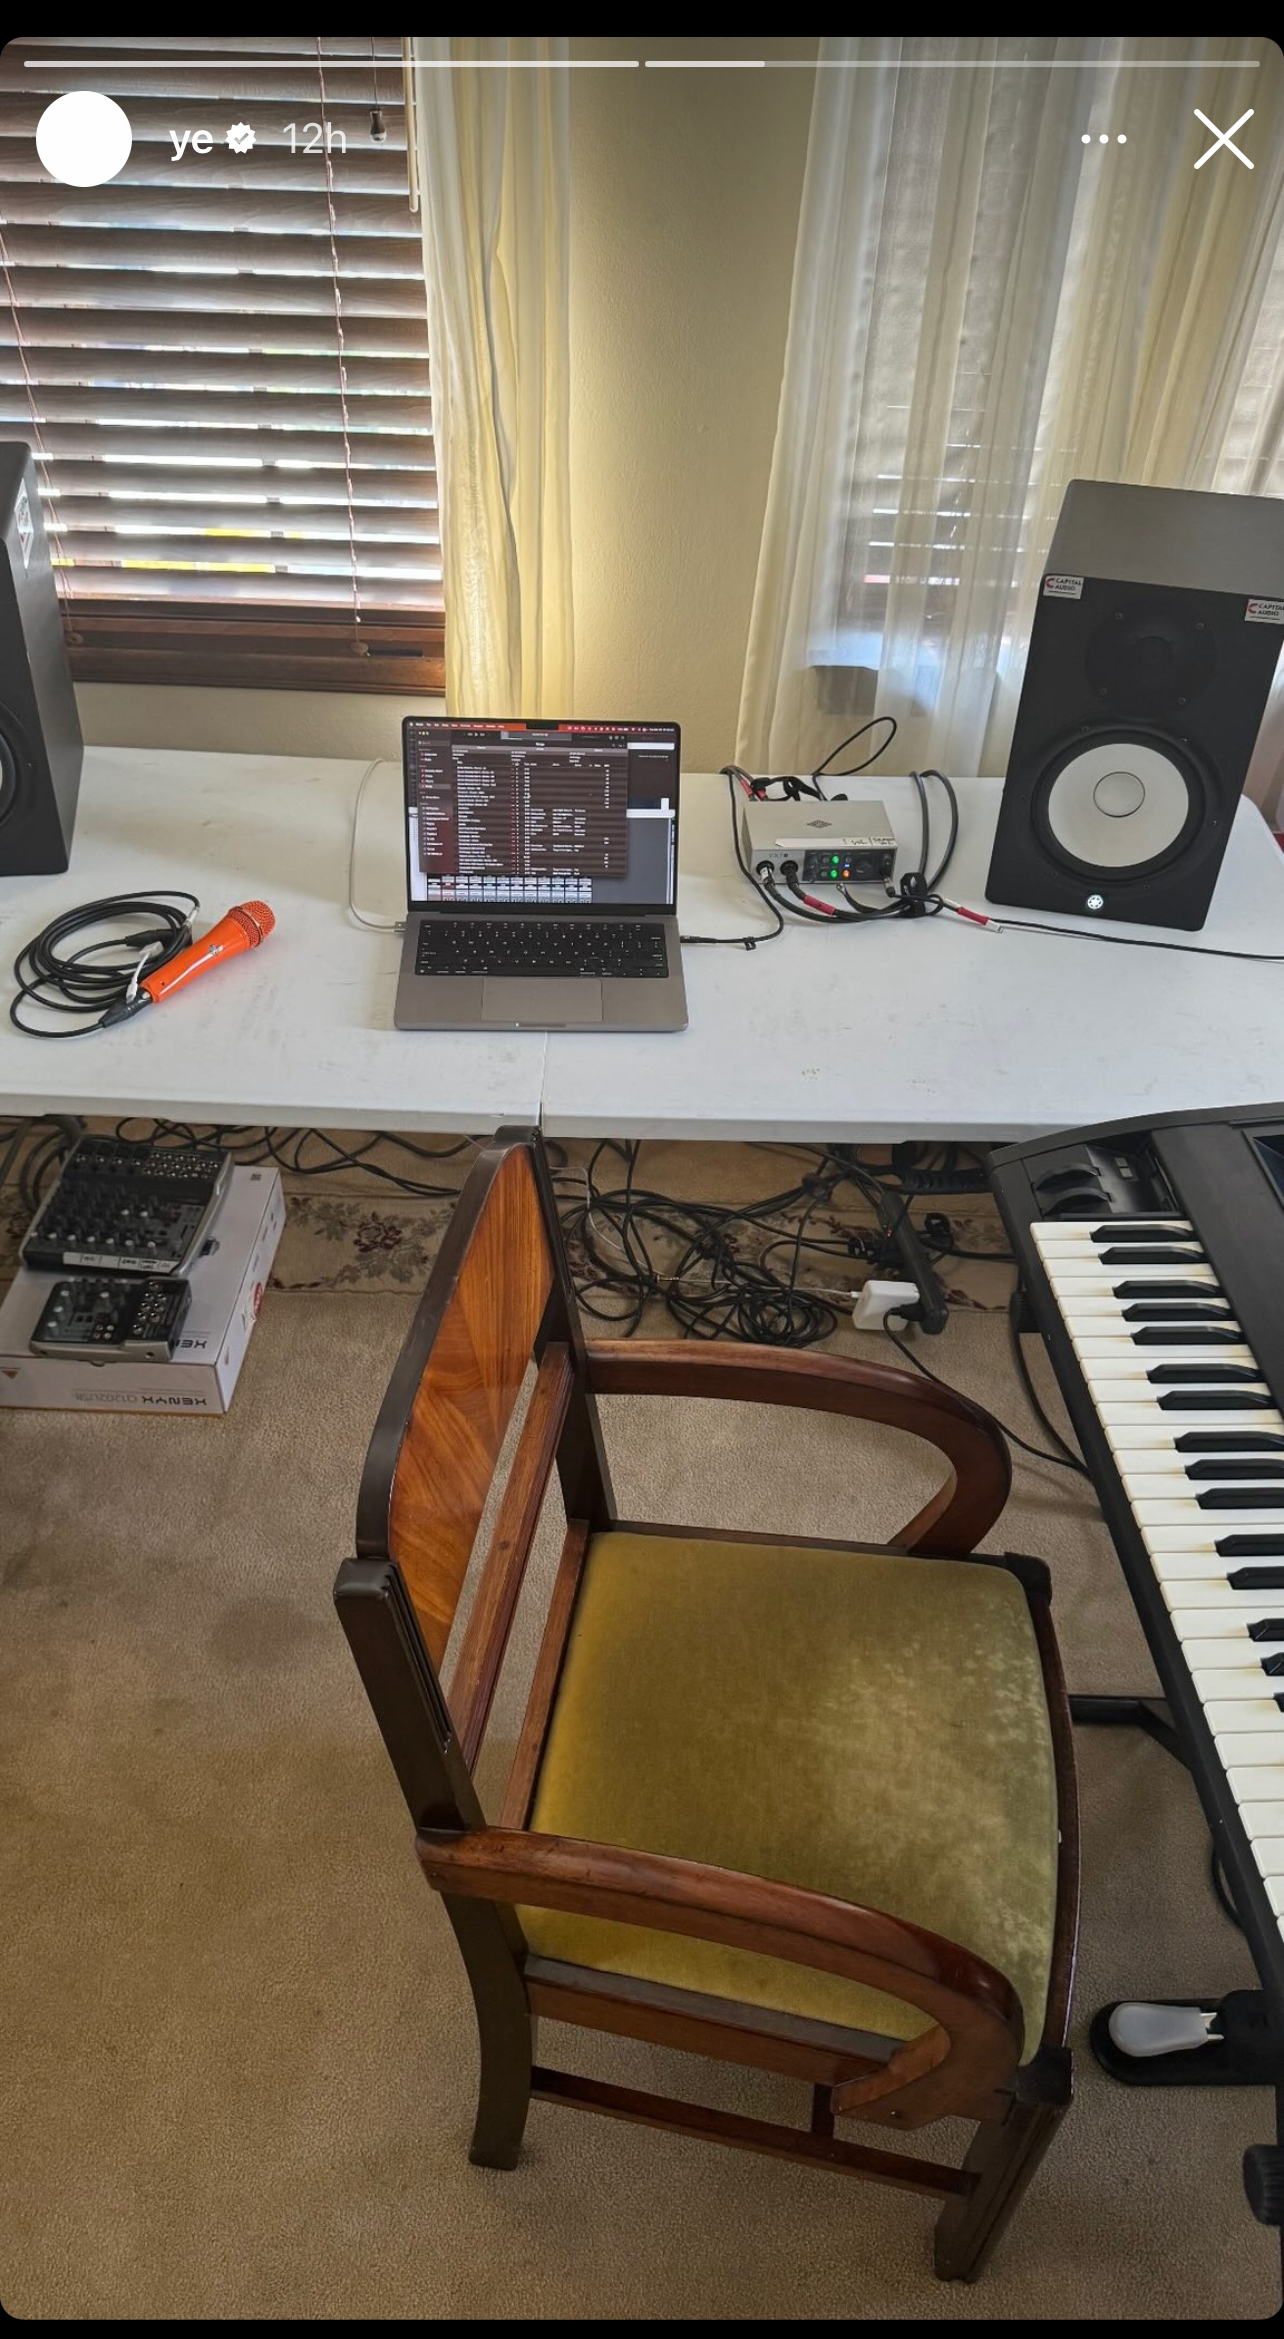 Home music production setup with laptop, audio interface, and studio monitor near a keyboard and chair